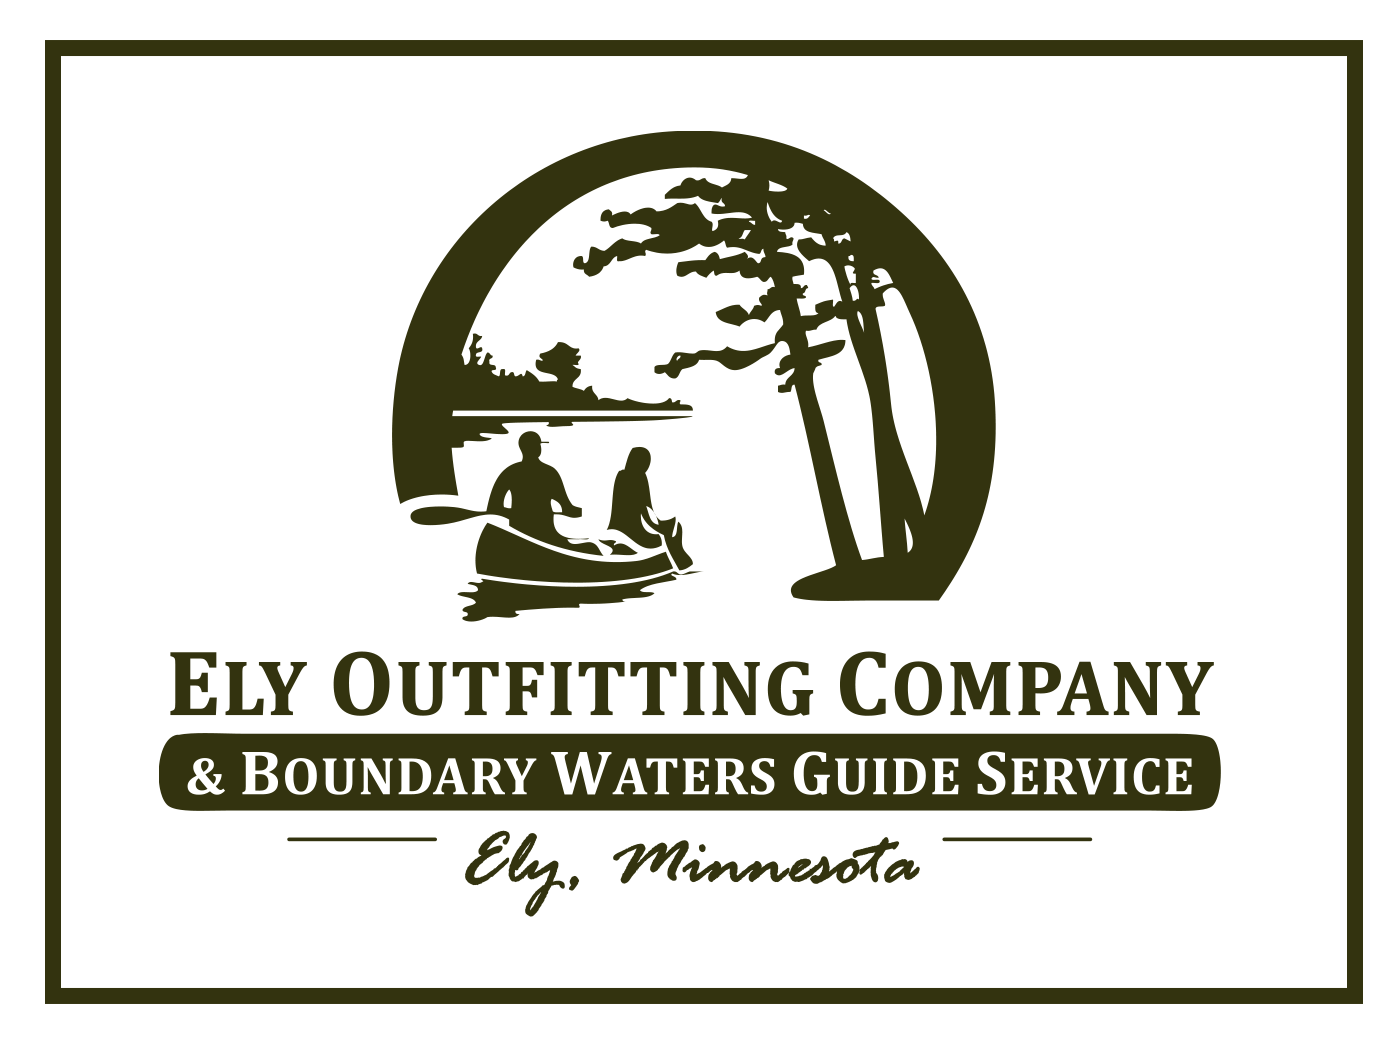 ely outfitting